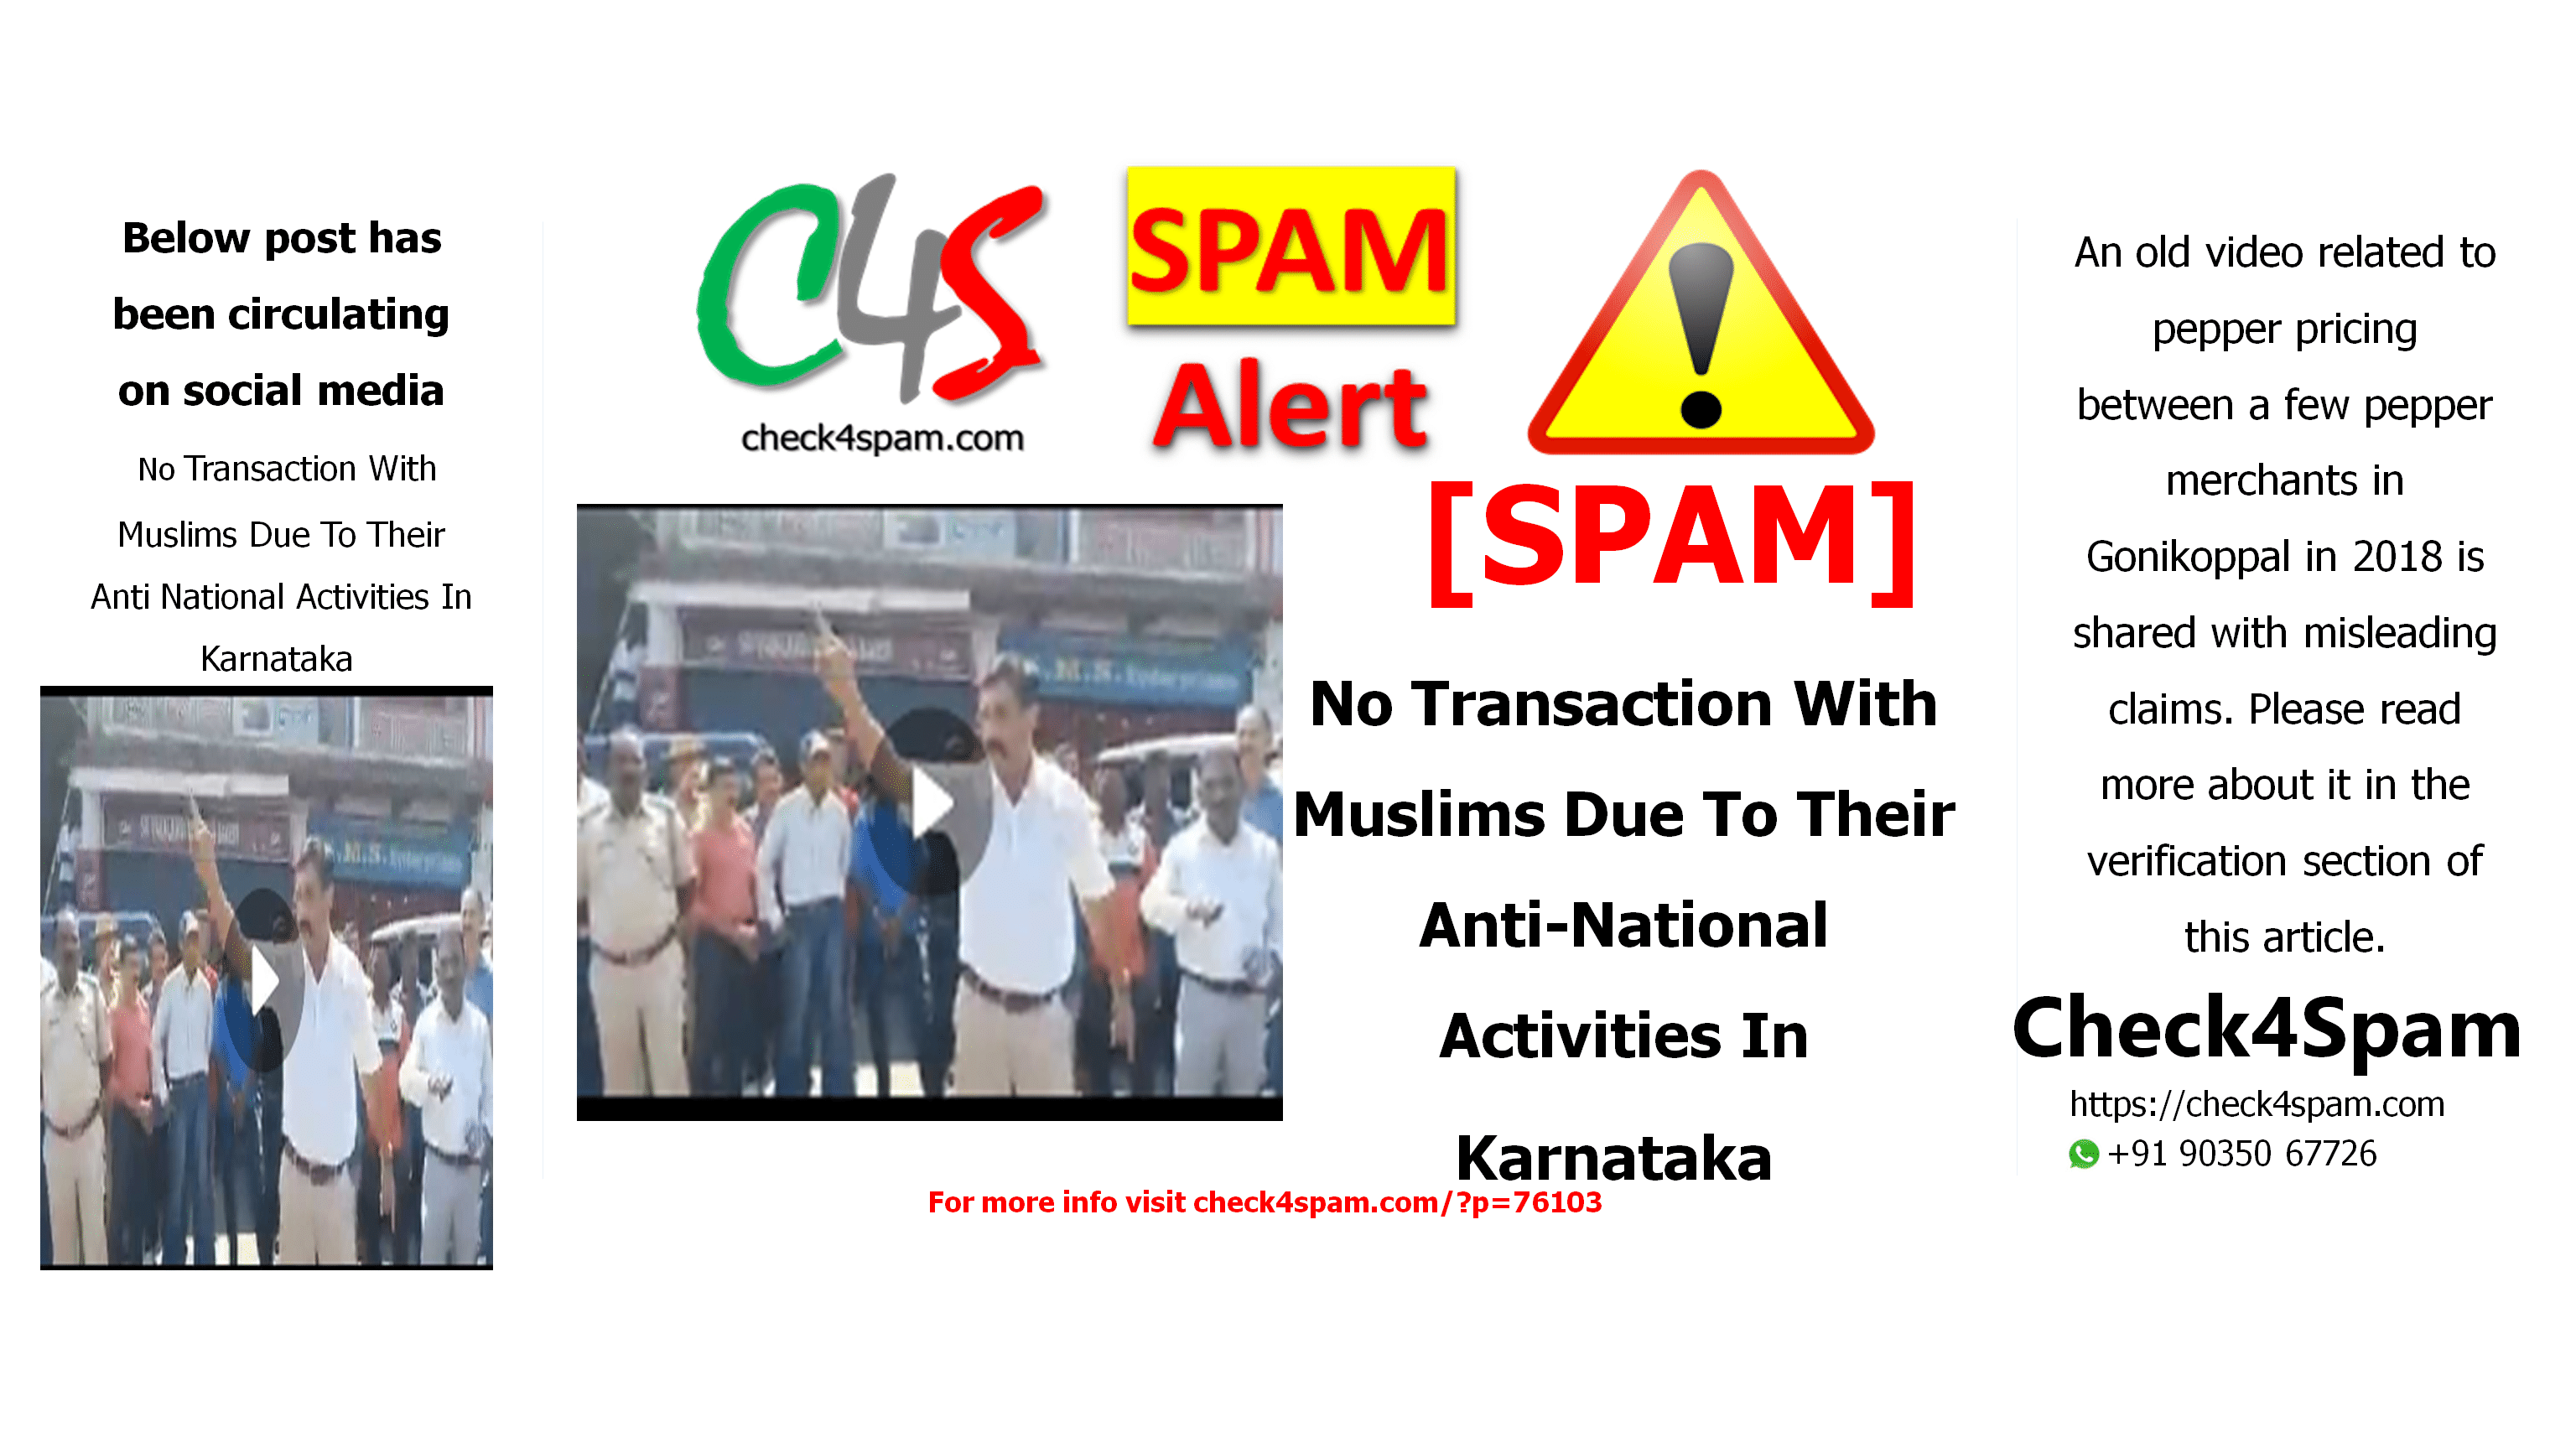 No Transaction With Muslims Due To Their Anti-National Activities In Karnataka